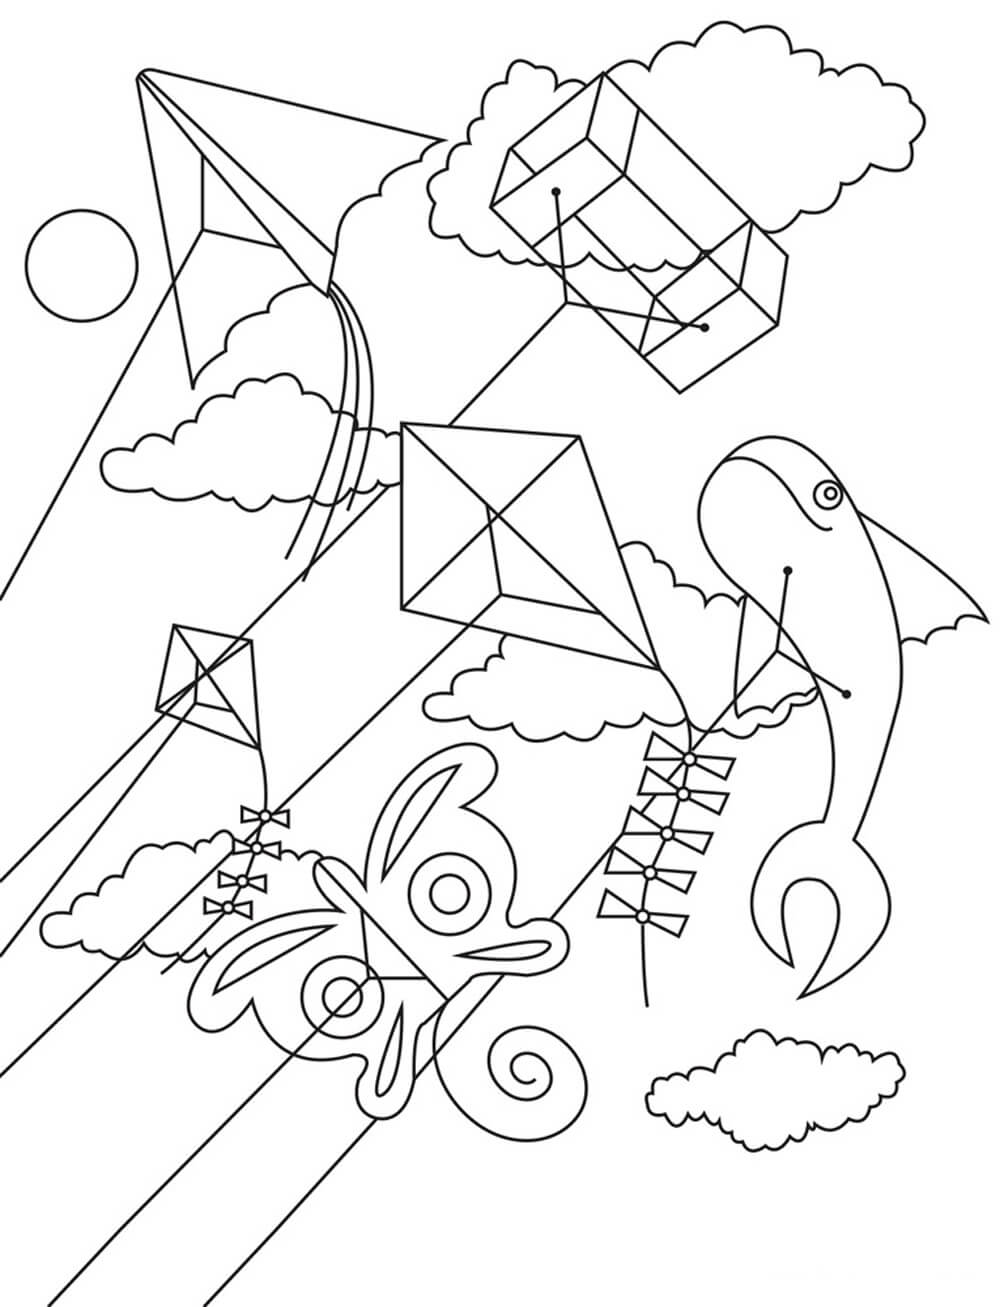 Nice Kite Coloring Page - Free Printable Coloring Pages for Kids